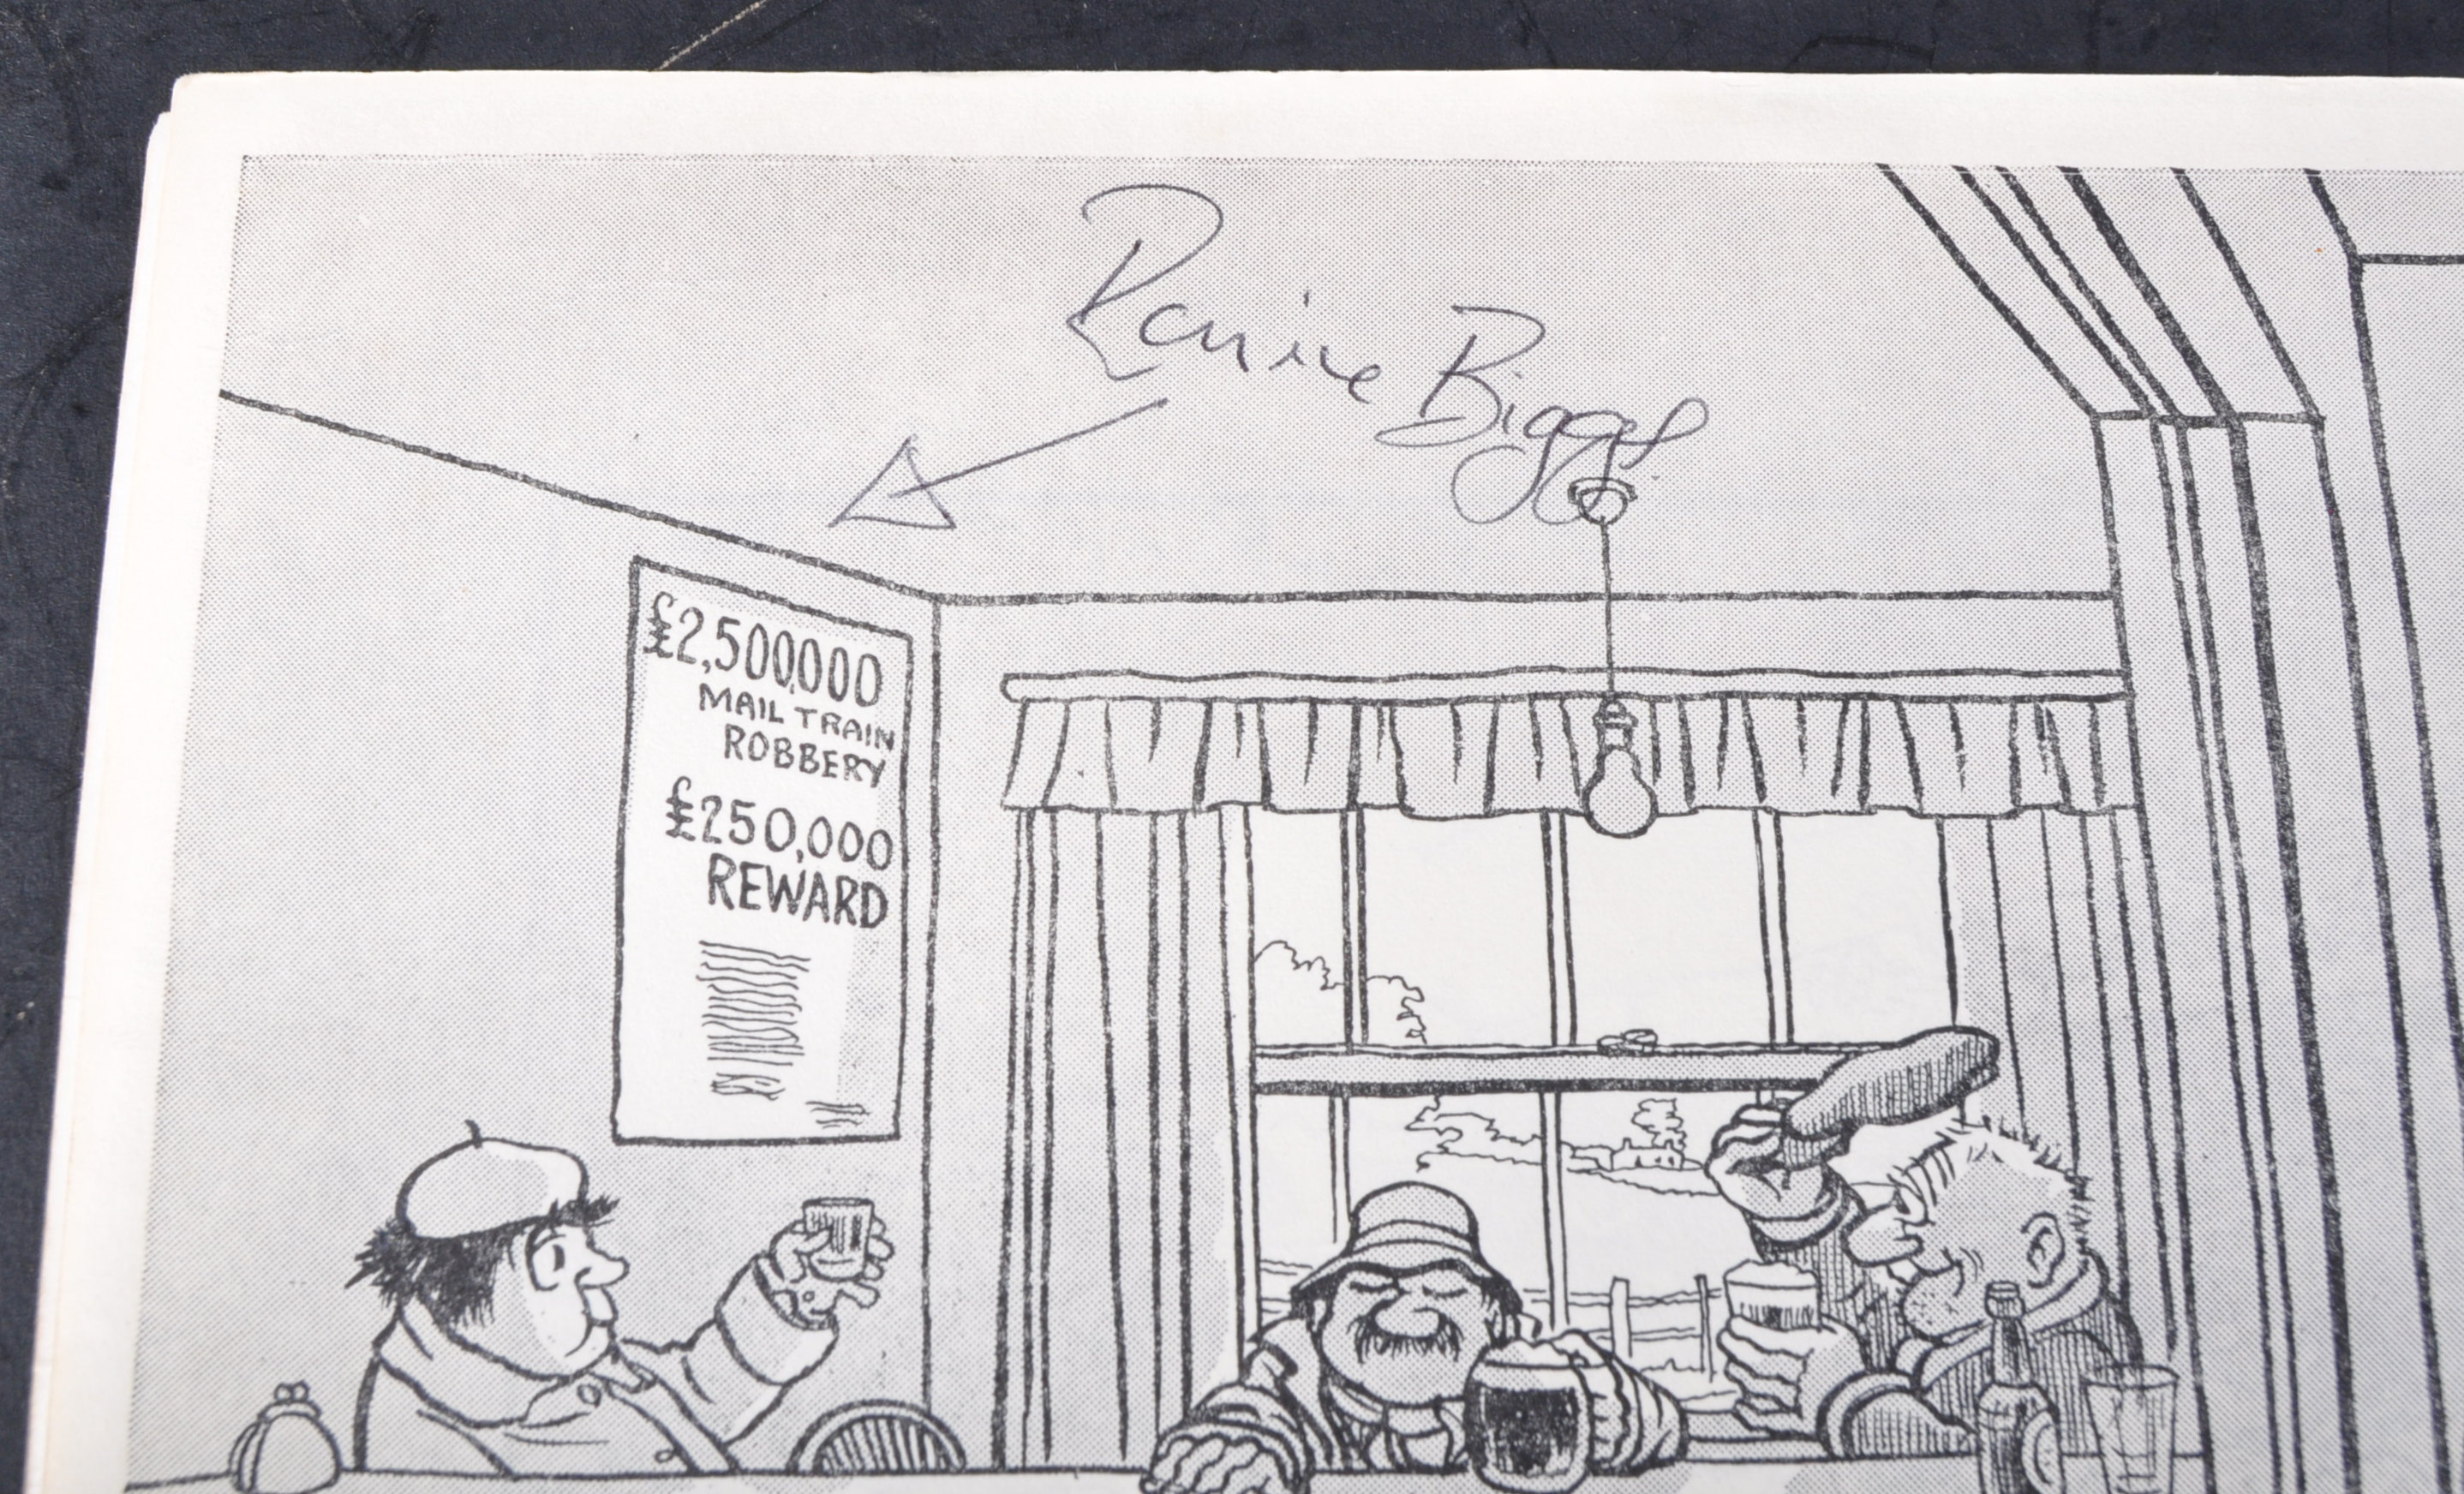 GREAT TRAIN ROBBERY - RONNIE BIGGS (1929-2013) - SIGNED CARTOON - Image 2 of 5